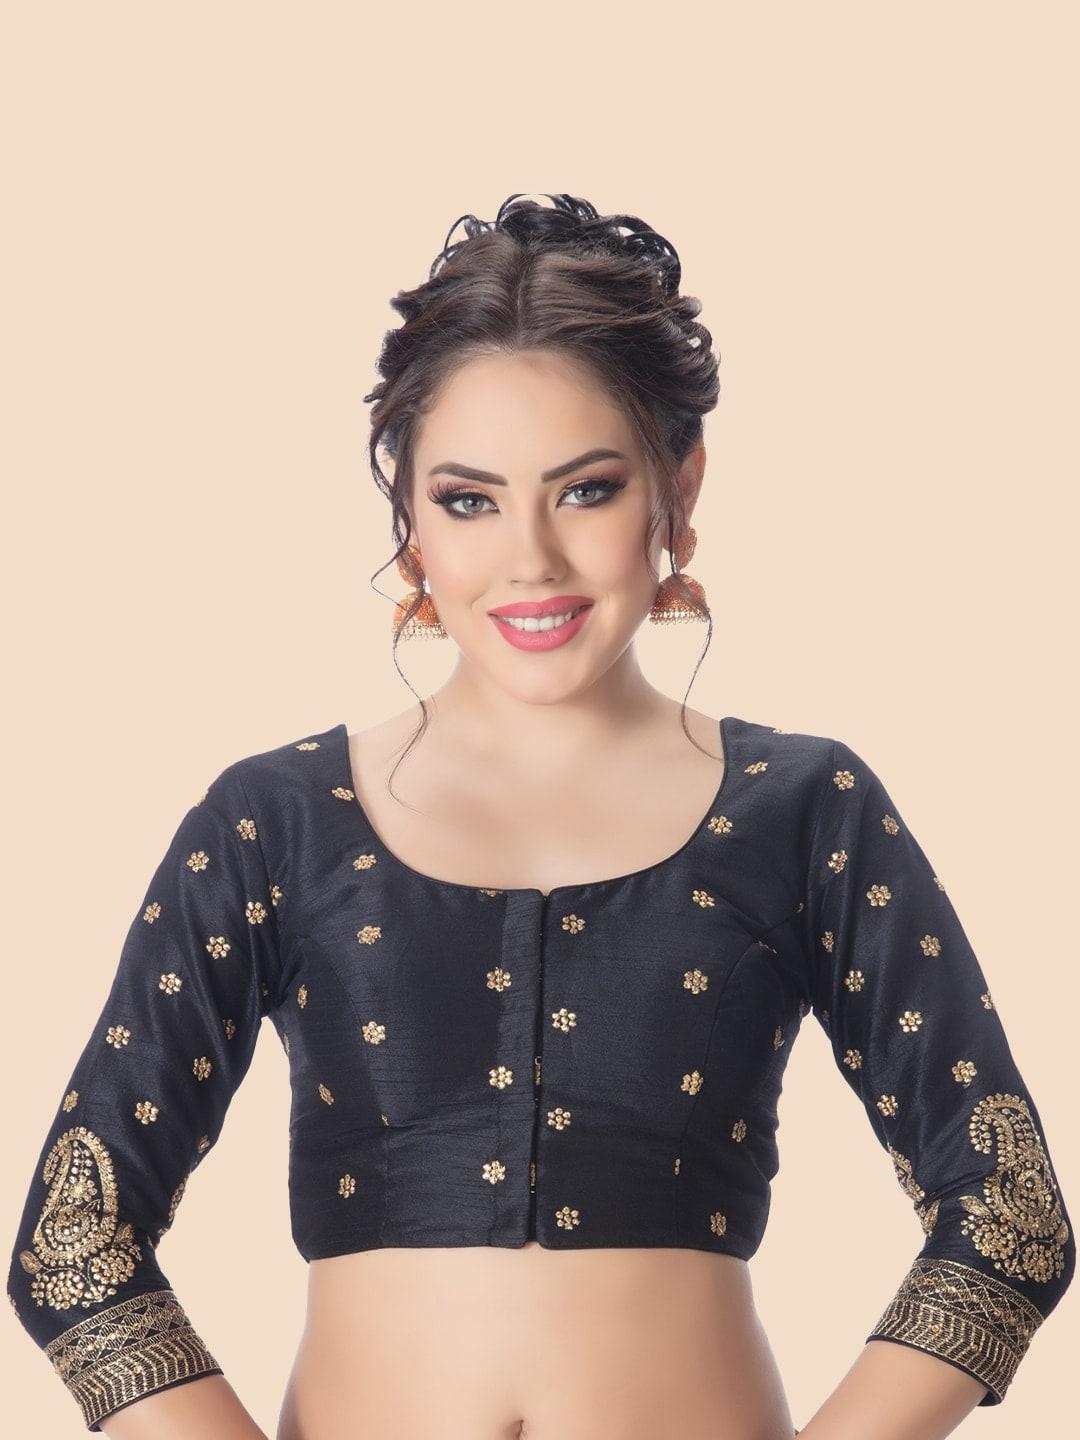 neckbook-black-&-gold-toned-embroidered-princess-cut-padded-readymade-saree-blouse